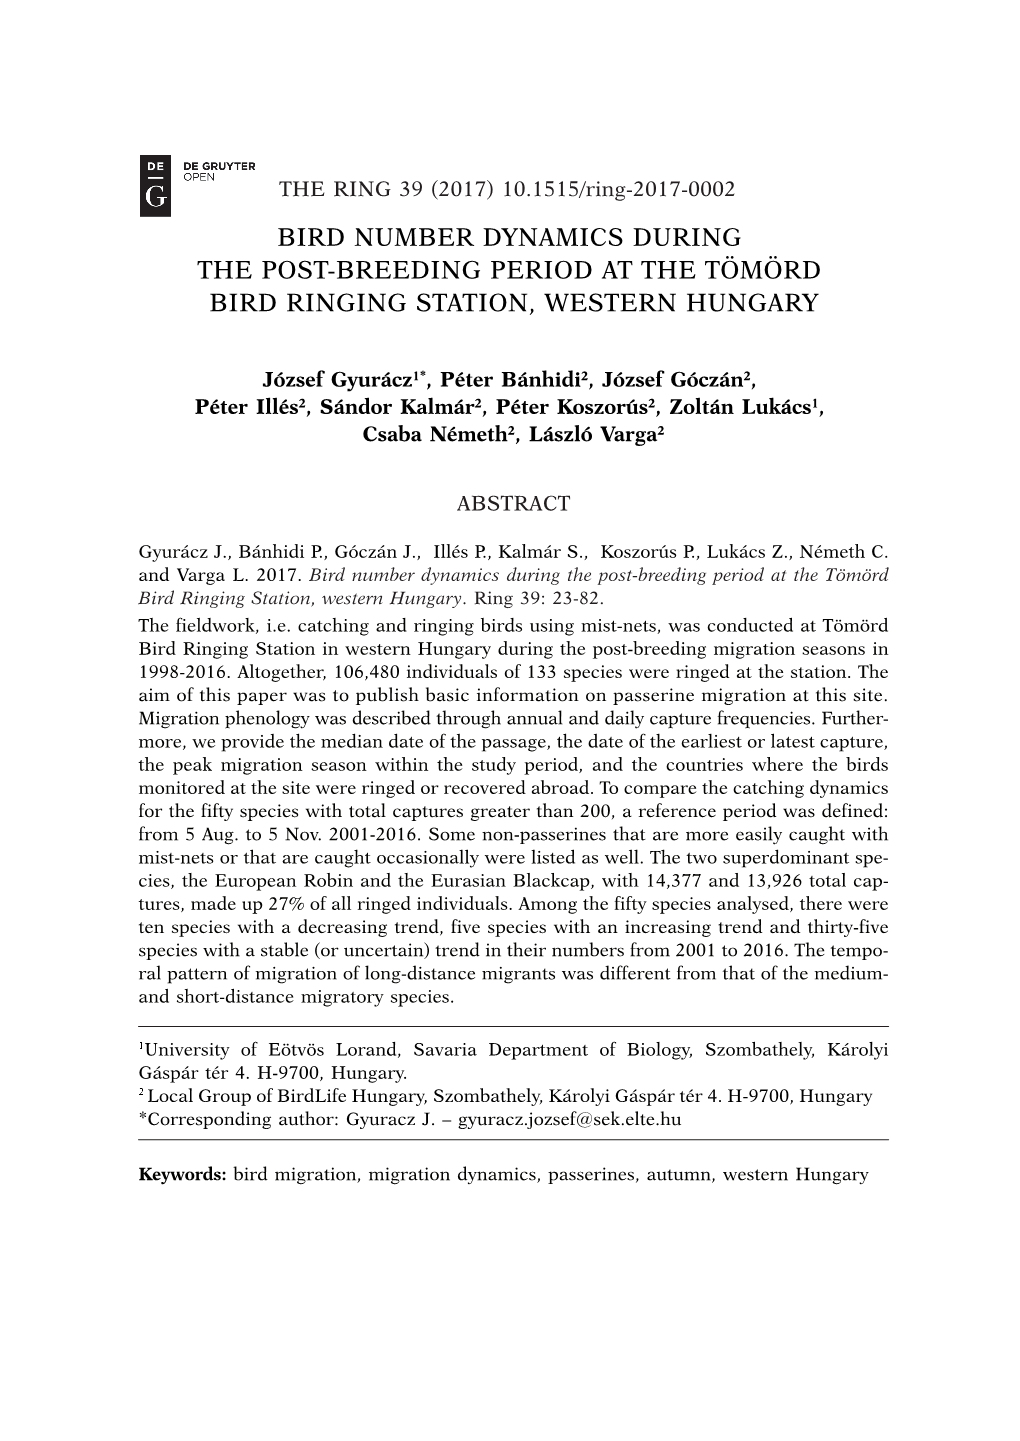 Bird Number Dynamics During the Post-Breeding Period at the Tömörd Bird Ringing Station, Western Hungary